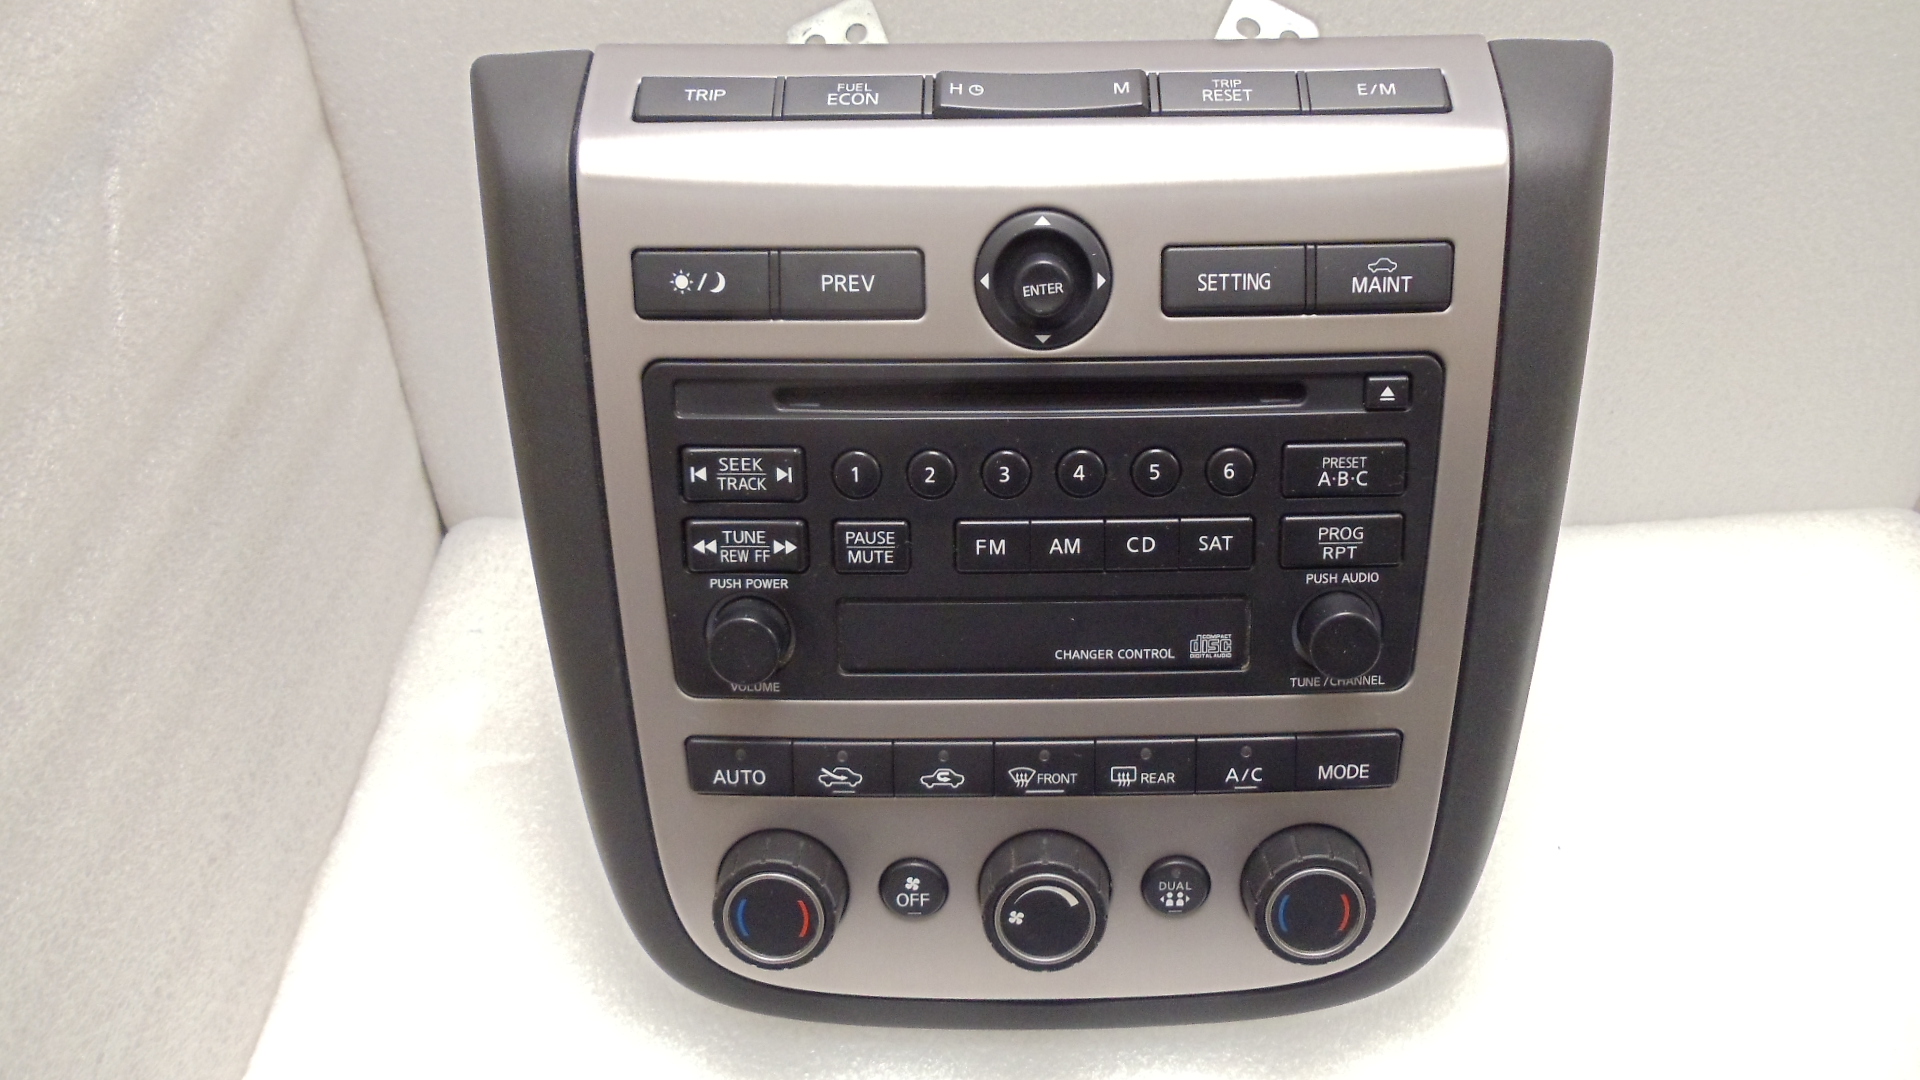 2004 Nissan murano cd player problems #9